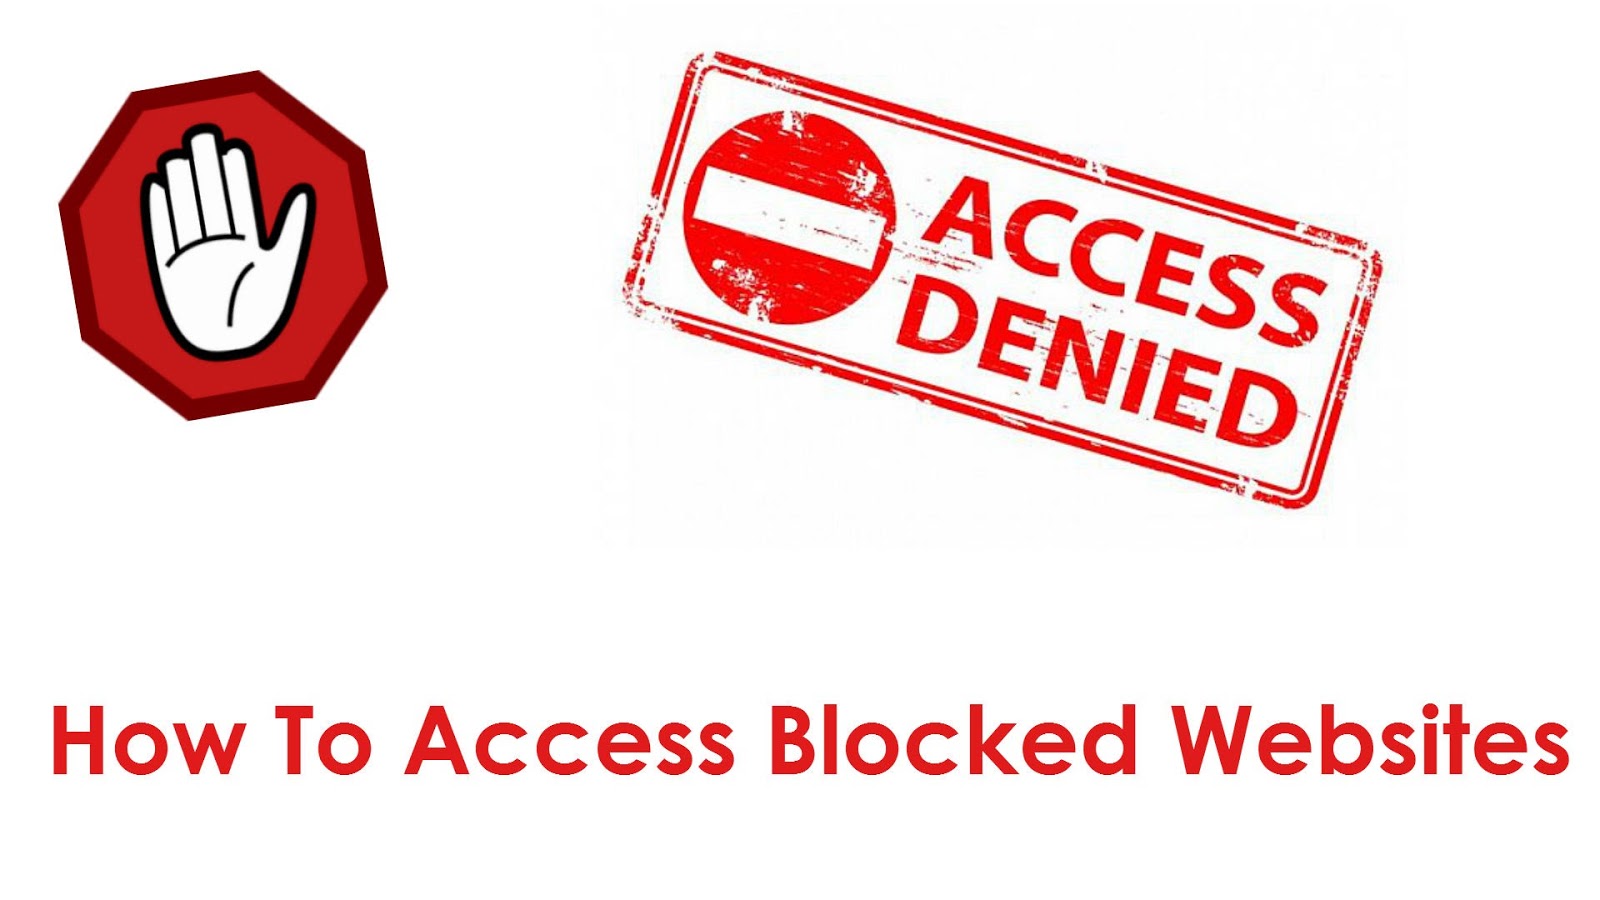 Https youtube com t restricted access blocked. Access blocked. Site blocked. Blocked website. Blocked websites access.